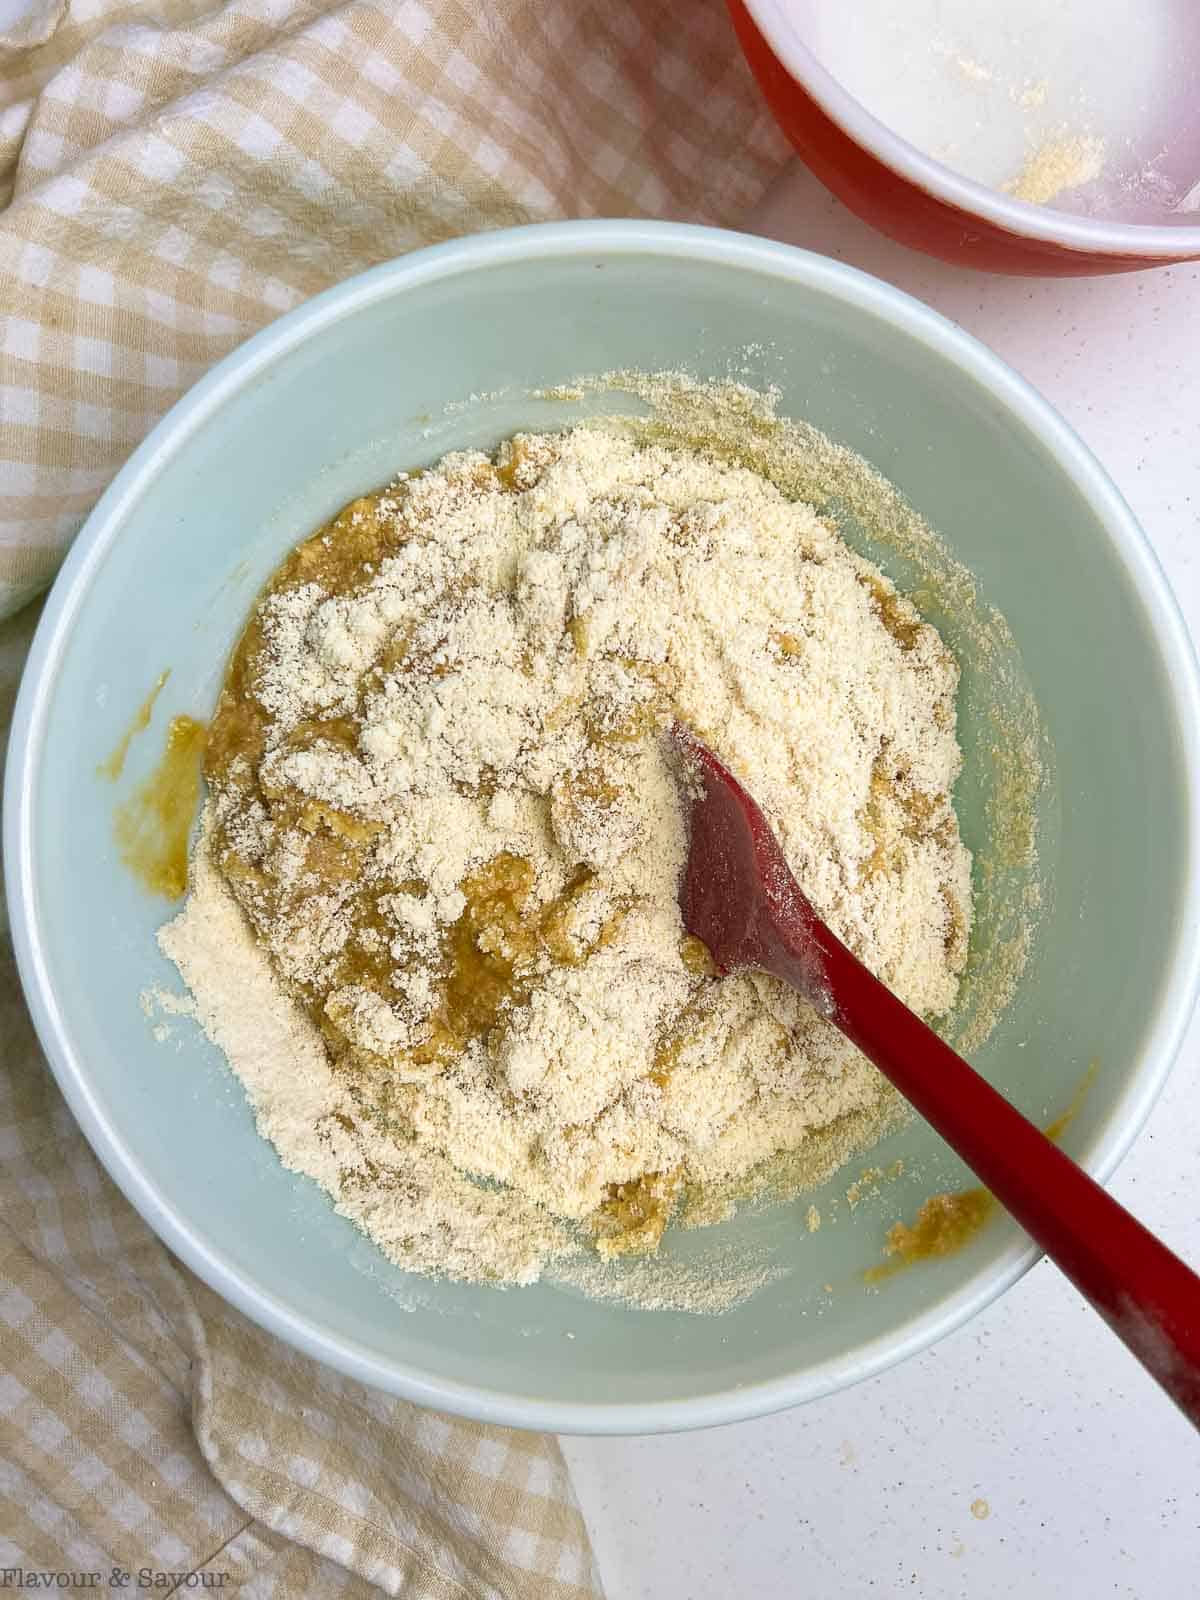 Combining wet and dry ingredients to make gluten-free banana muffins.